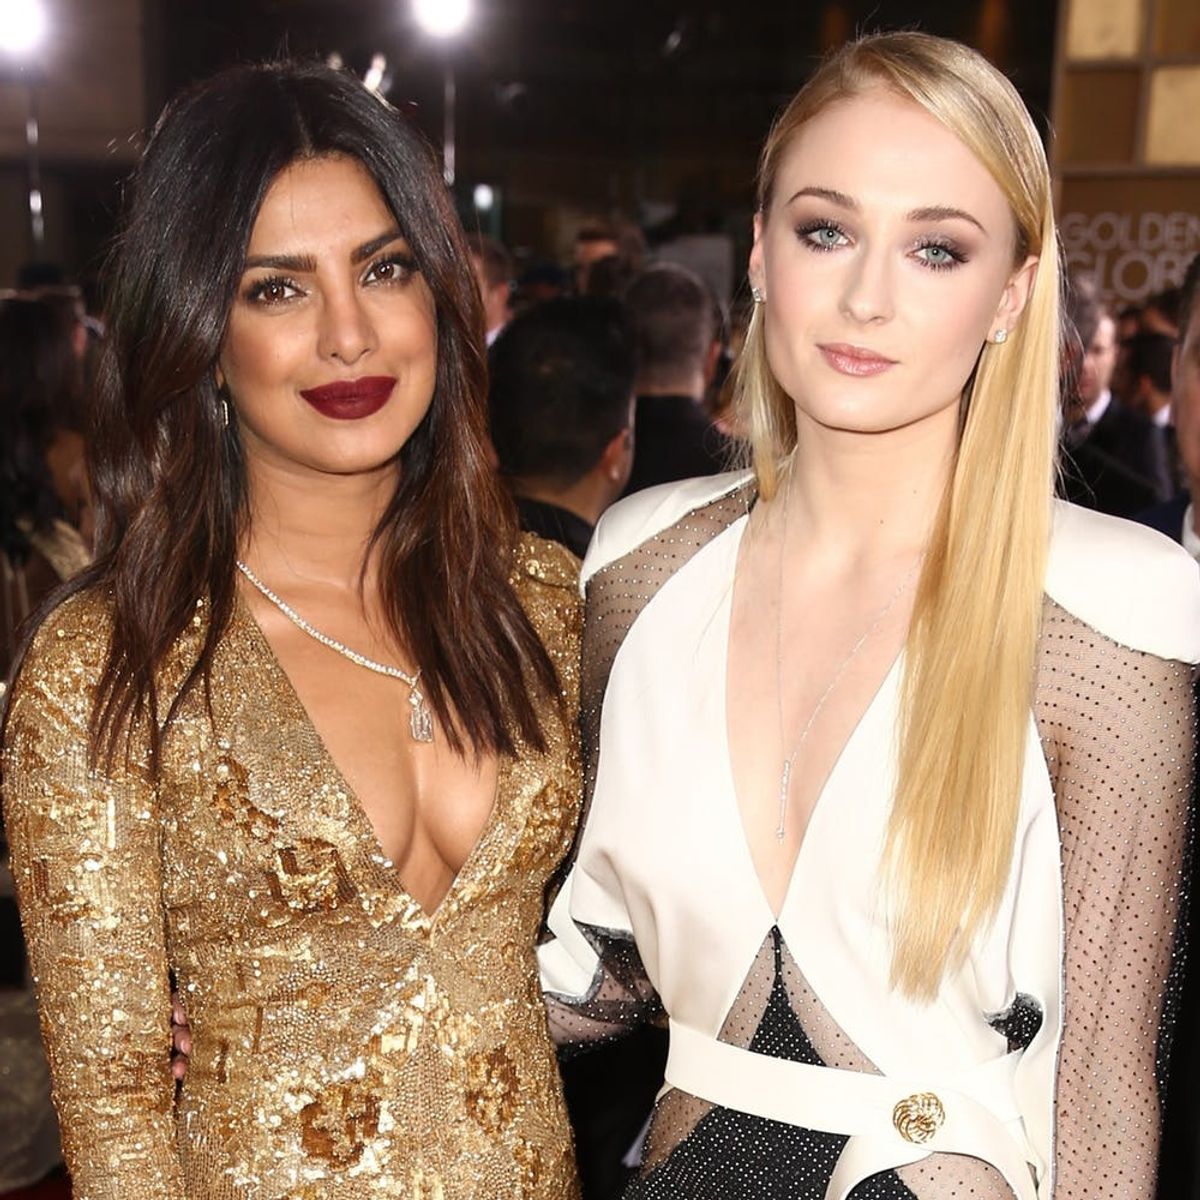 Sophie Turner Posted the Sweetest Message Welcoming Priyanka Chopra to the Family